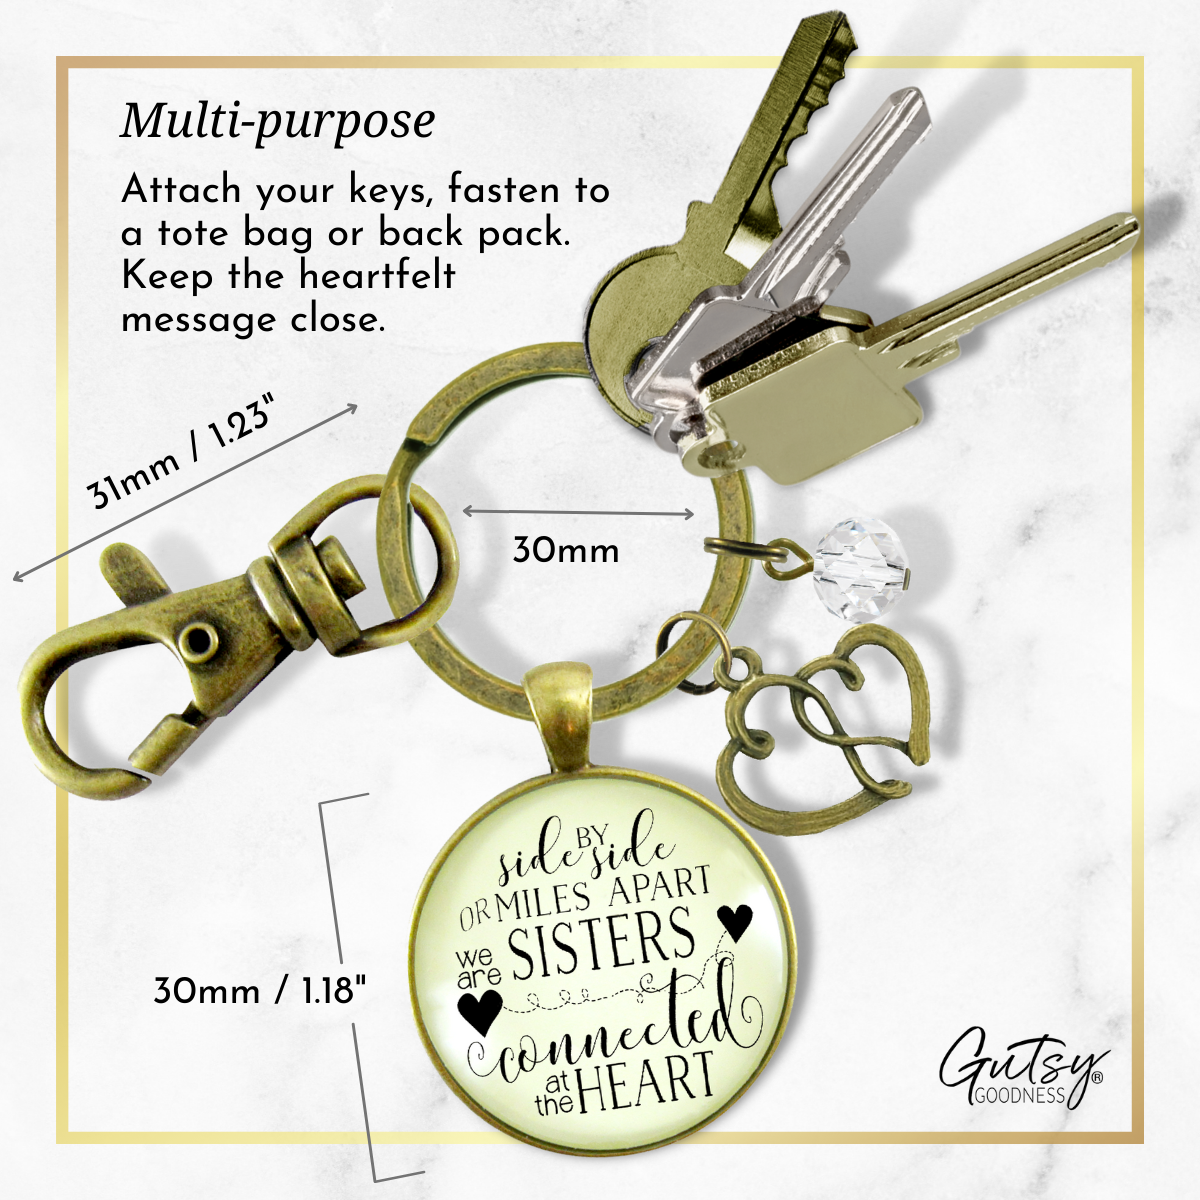 Love My Sister Keychain Side By Side Long Distance Meaningful BFF Sister Jewelry Gift Heart - Gutsy Goodness Handmade Jewelry;Love My Sister Keychain Side By Side Long Distance Meaningful Bff Sister Jewelry Gift Heart - Gutsy Goodness Handmade Jewelry Gifts